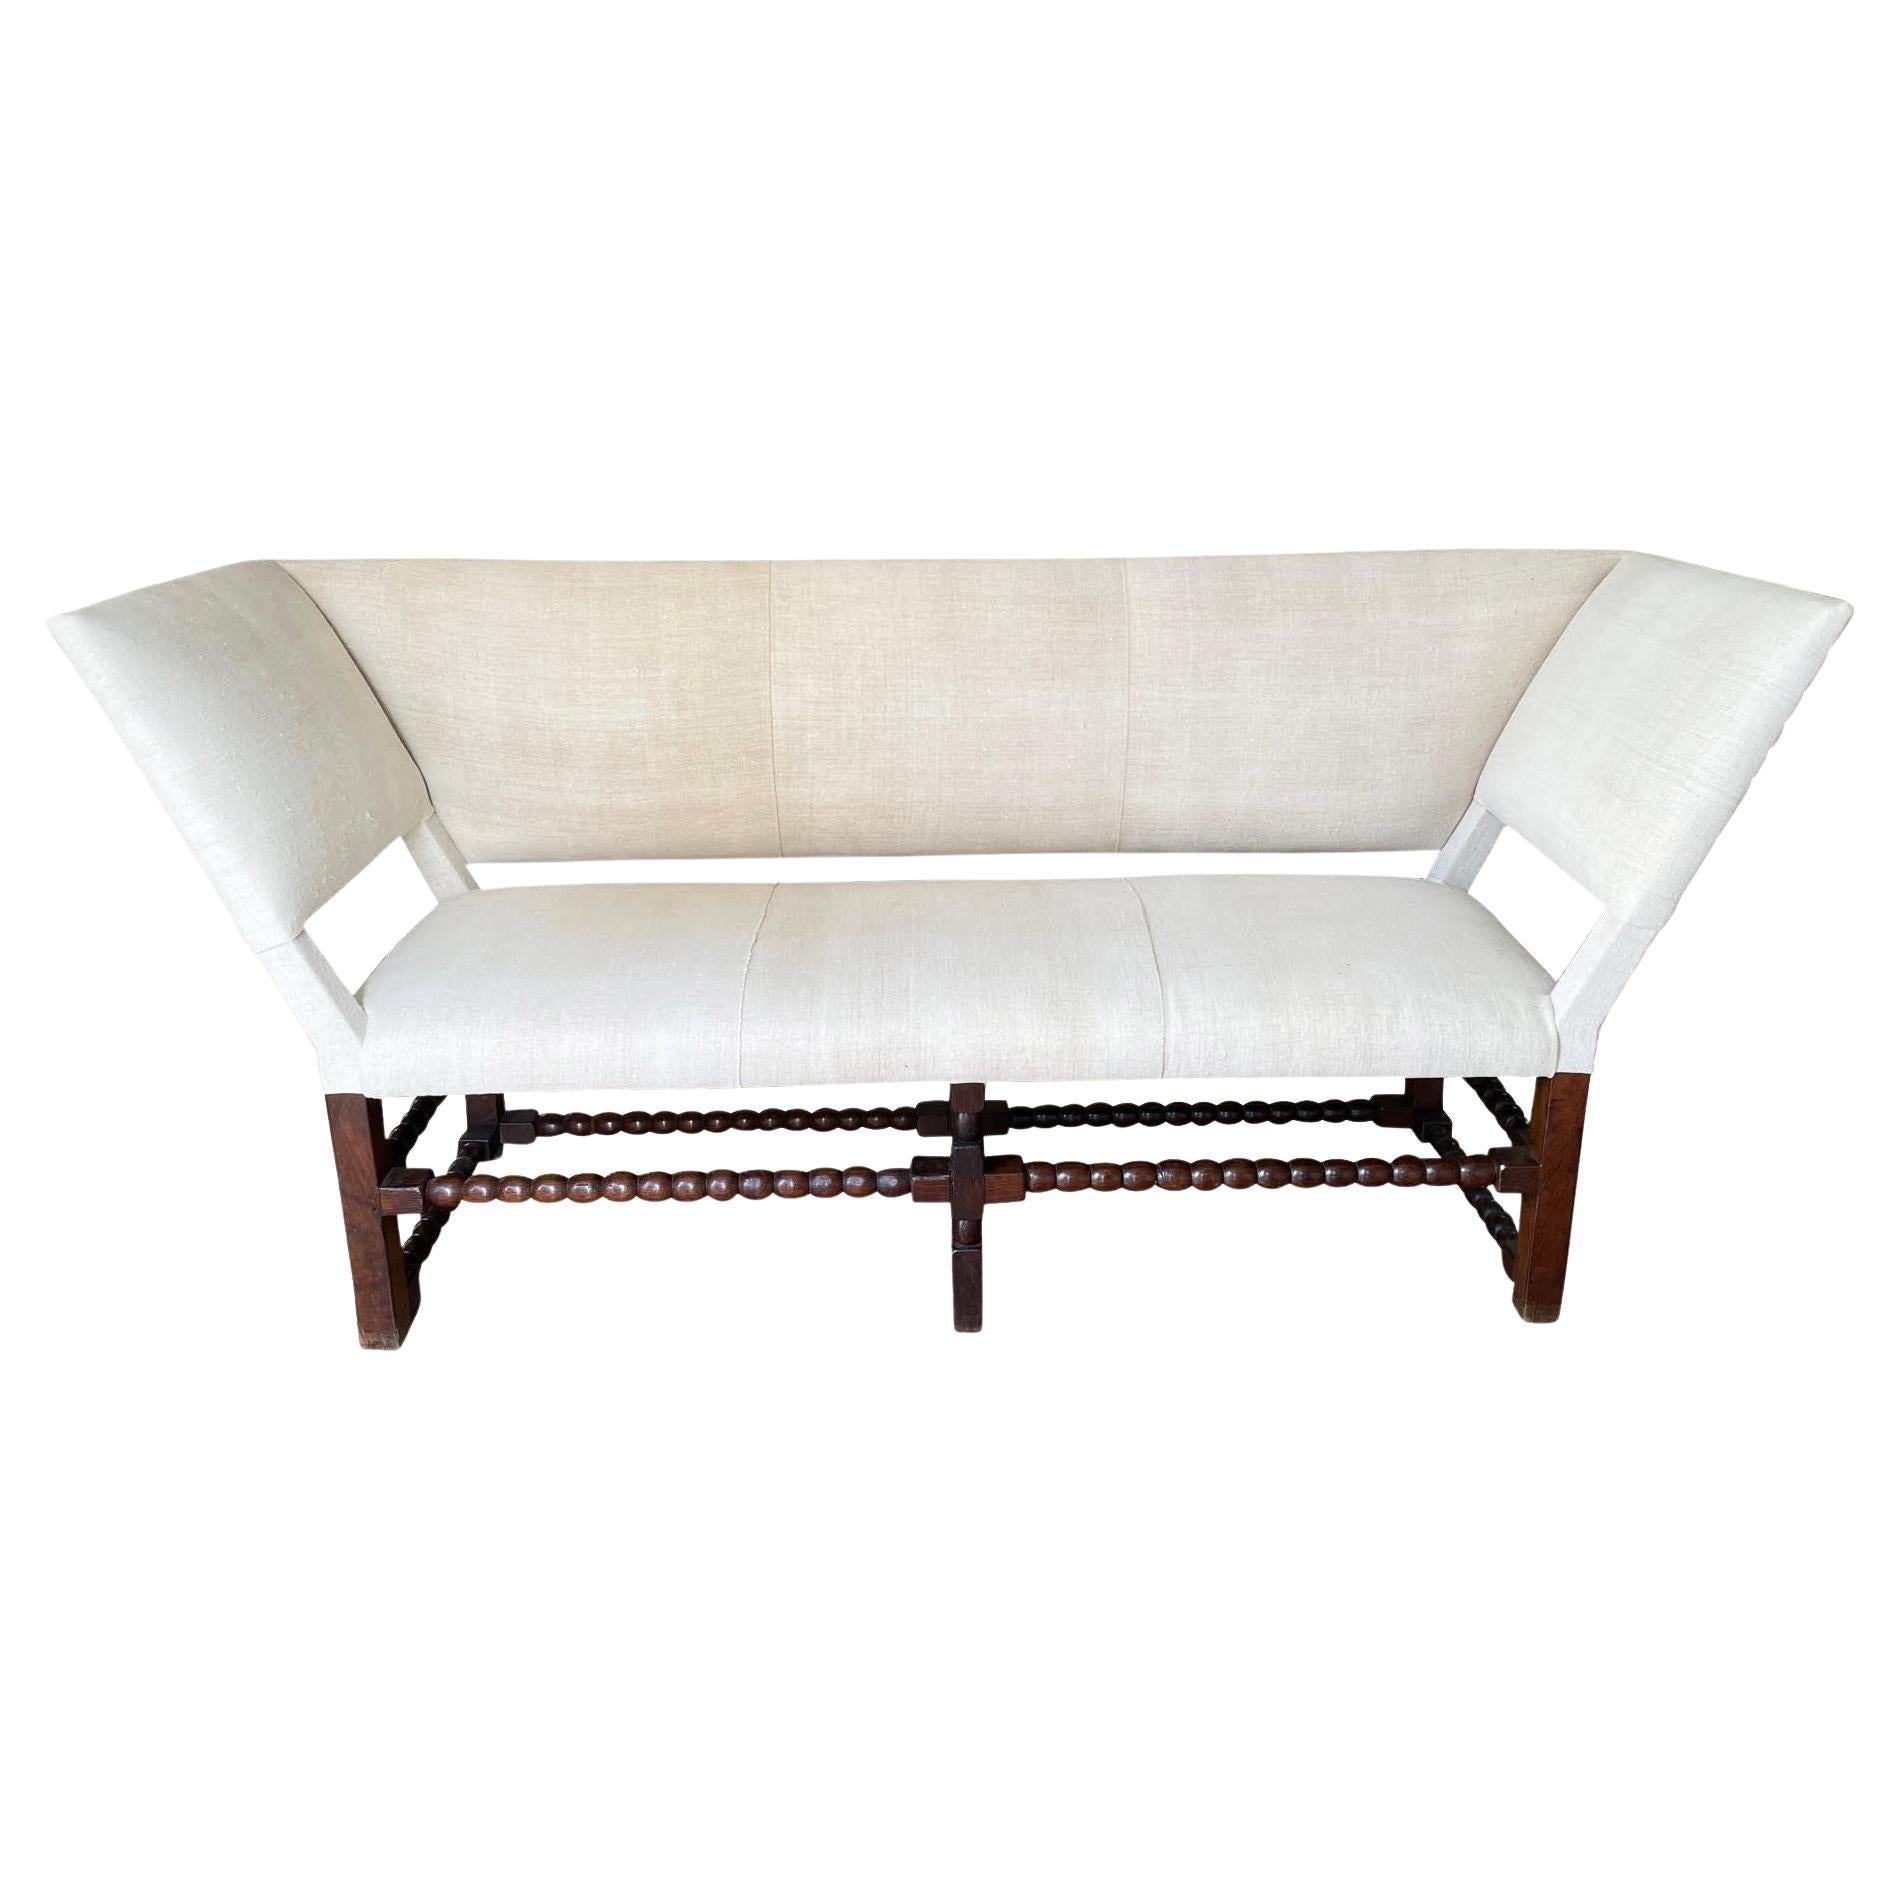 Linen Upholstered Wing Bench, Italy, 1900c